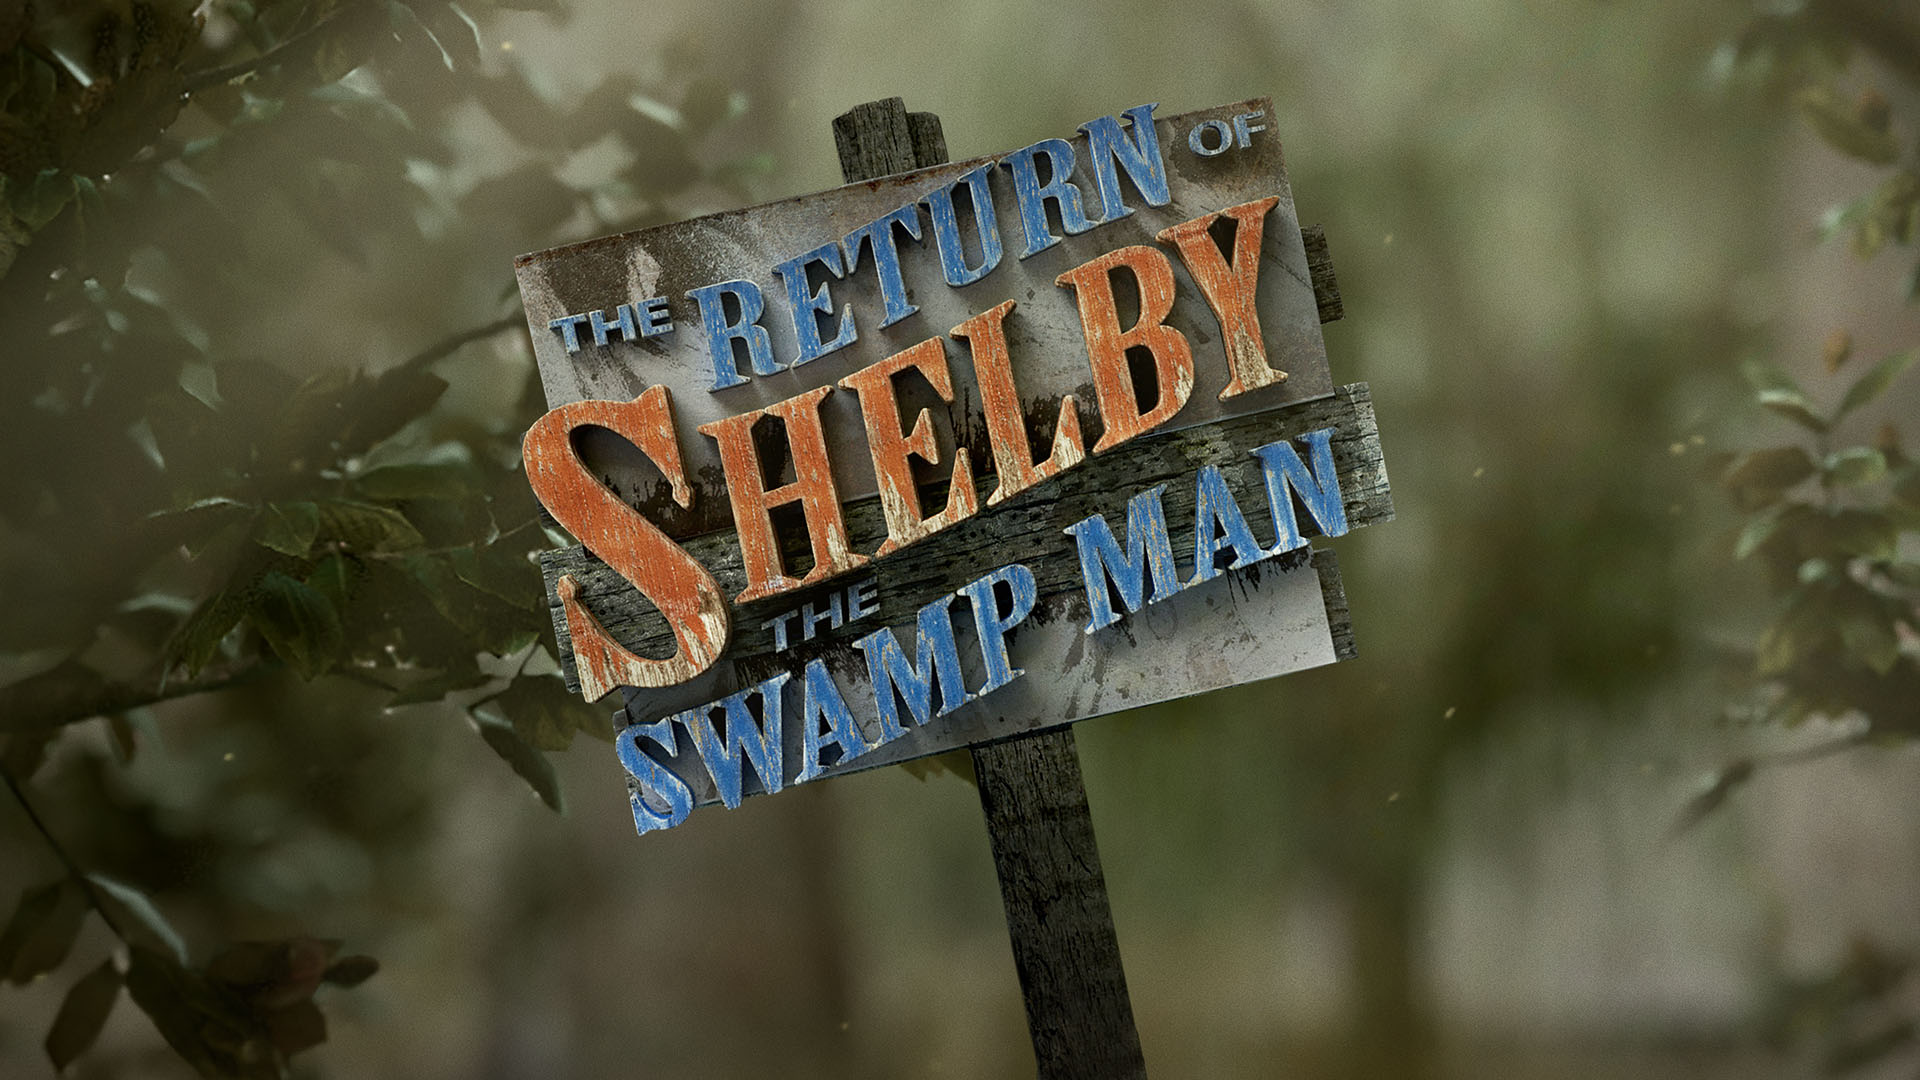 The Return of Shelby The Swamp Man